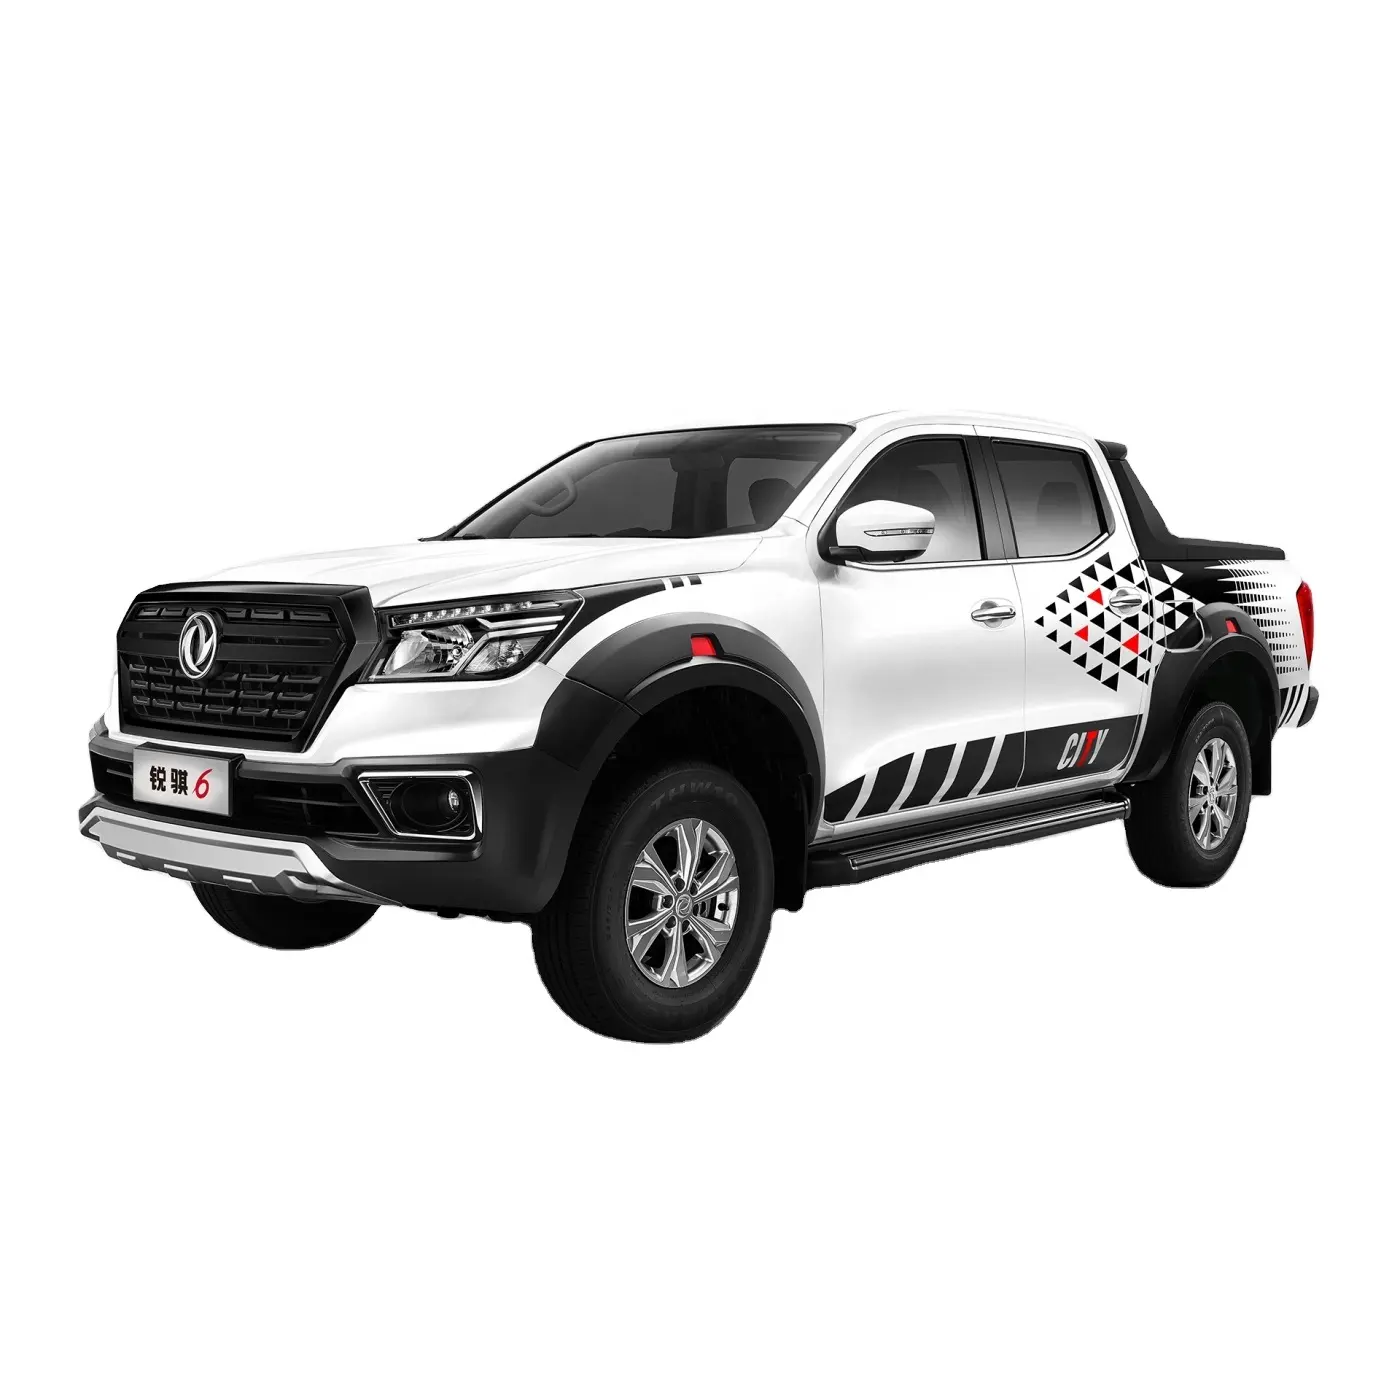 New Brand Chinese Off-road LHD Rich 6 gasoline engine Pickup Truck/4x4 off road pickup for sale